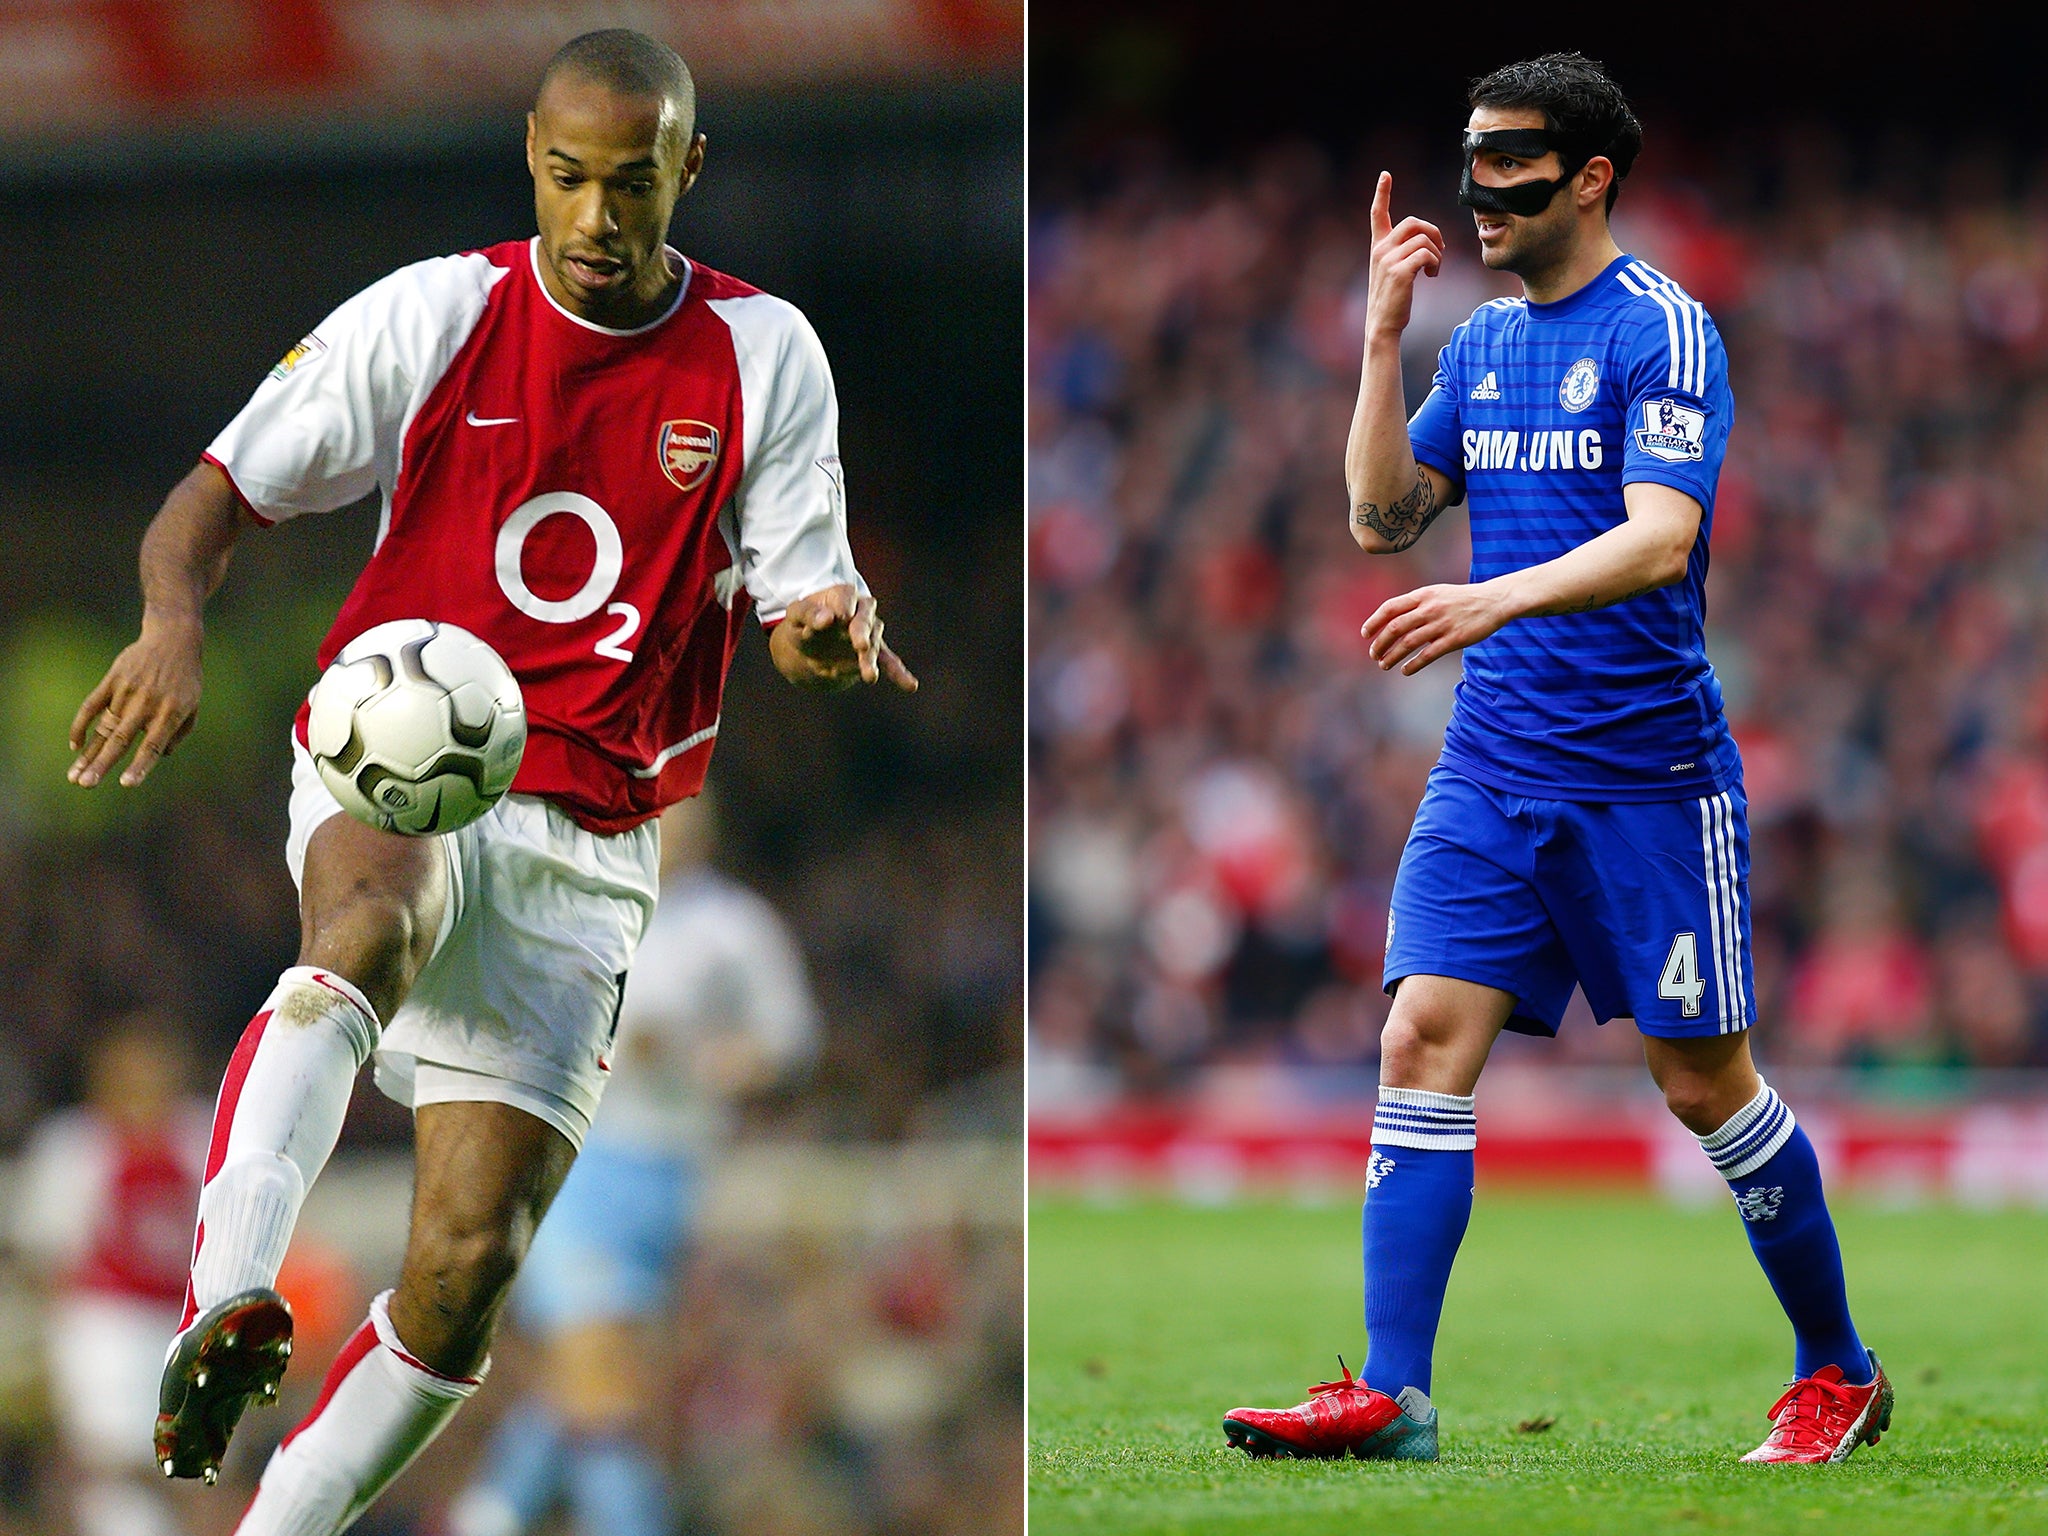 Thierry Henry and Cesc Fabregas